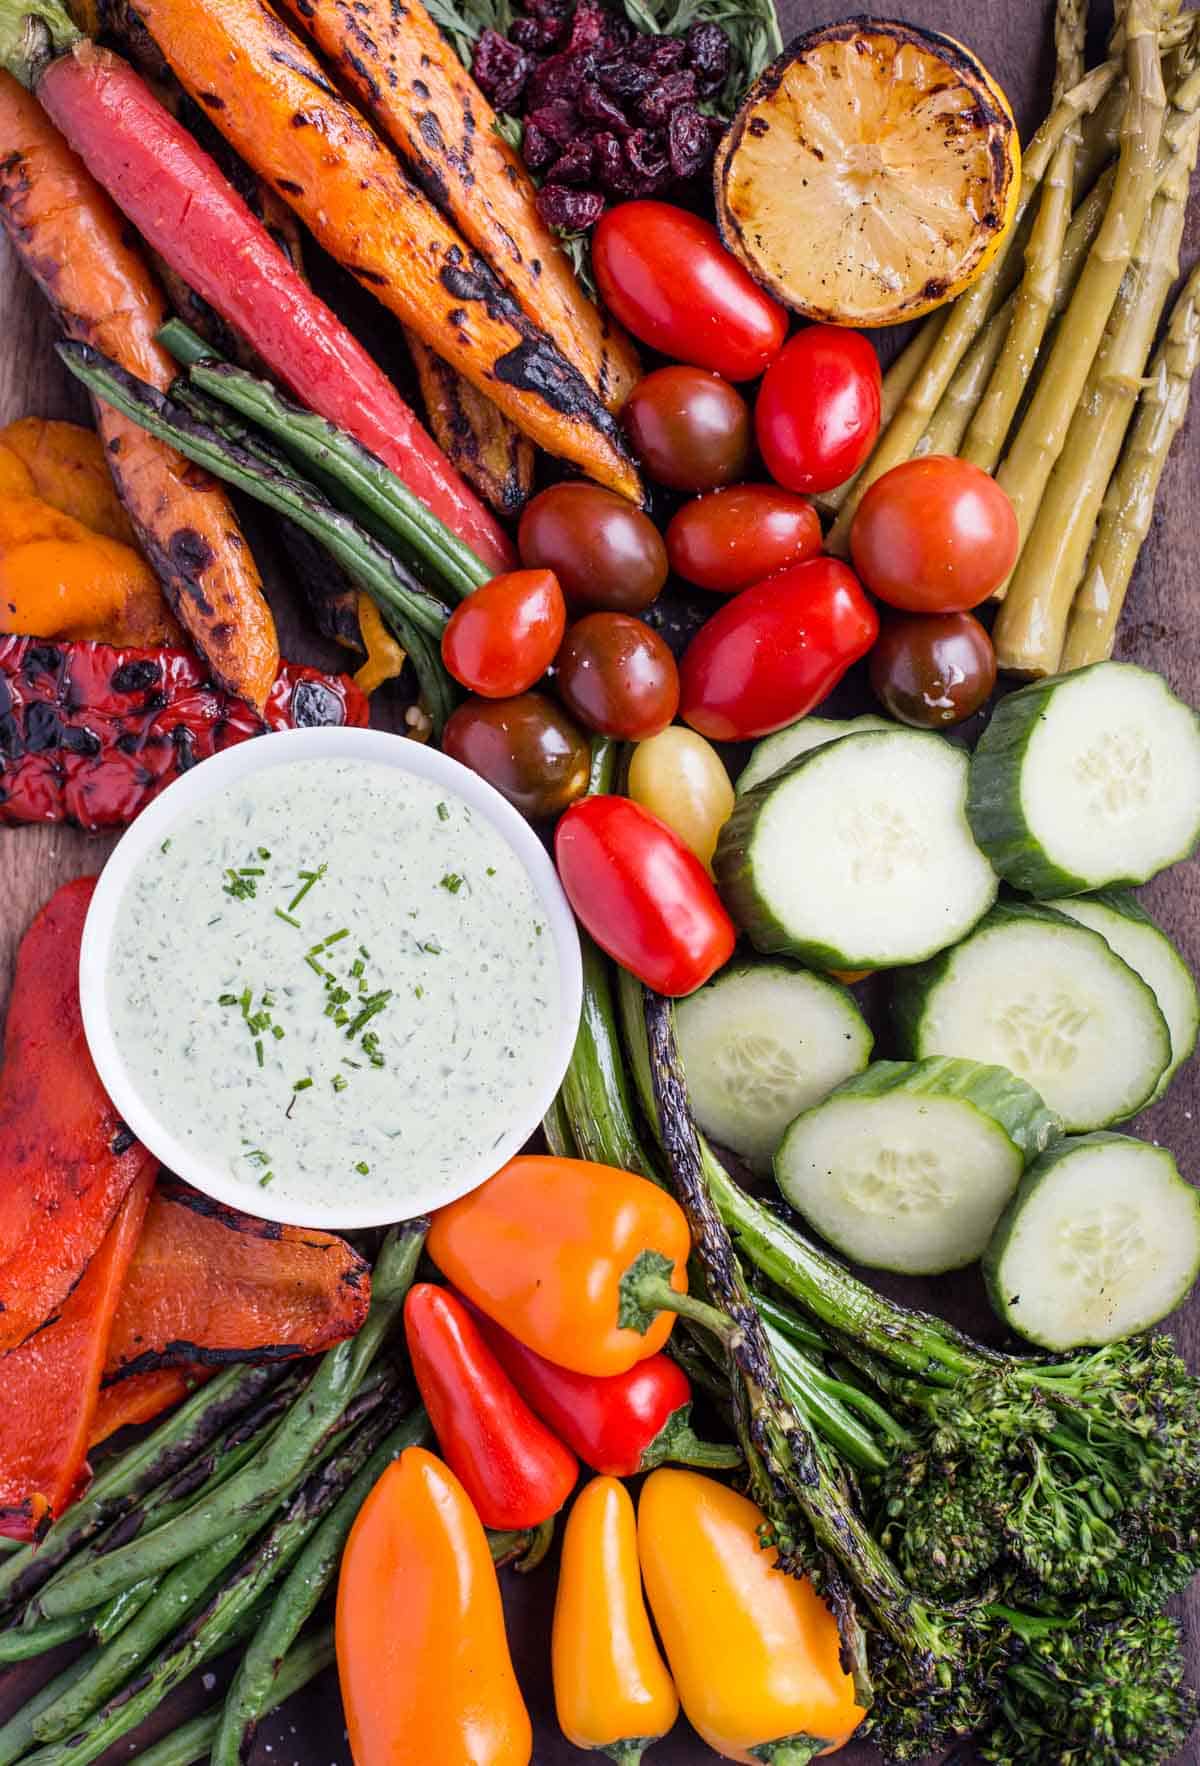 Lots of cut up and colorful vegetables on a platter with a green dipping sauce for the ultimate crudités appetizer